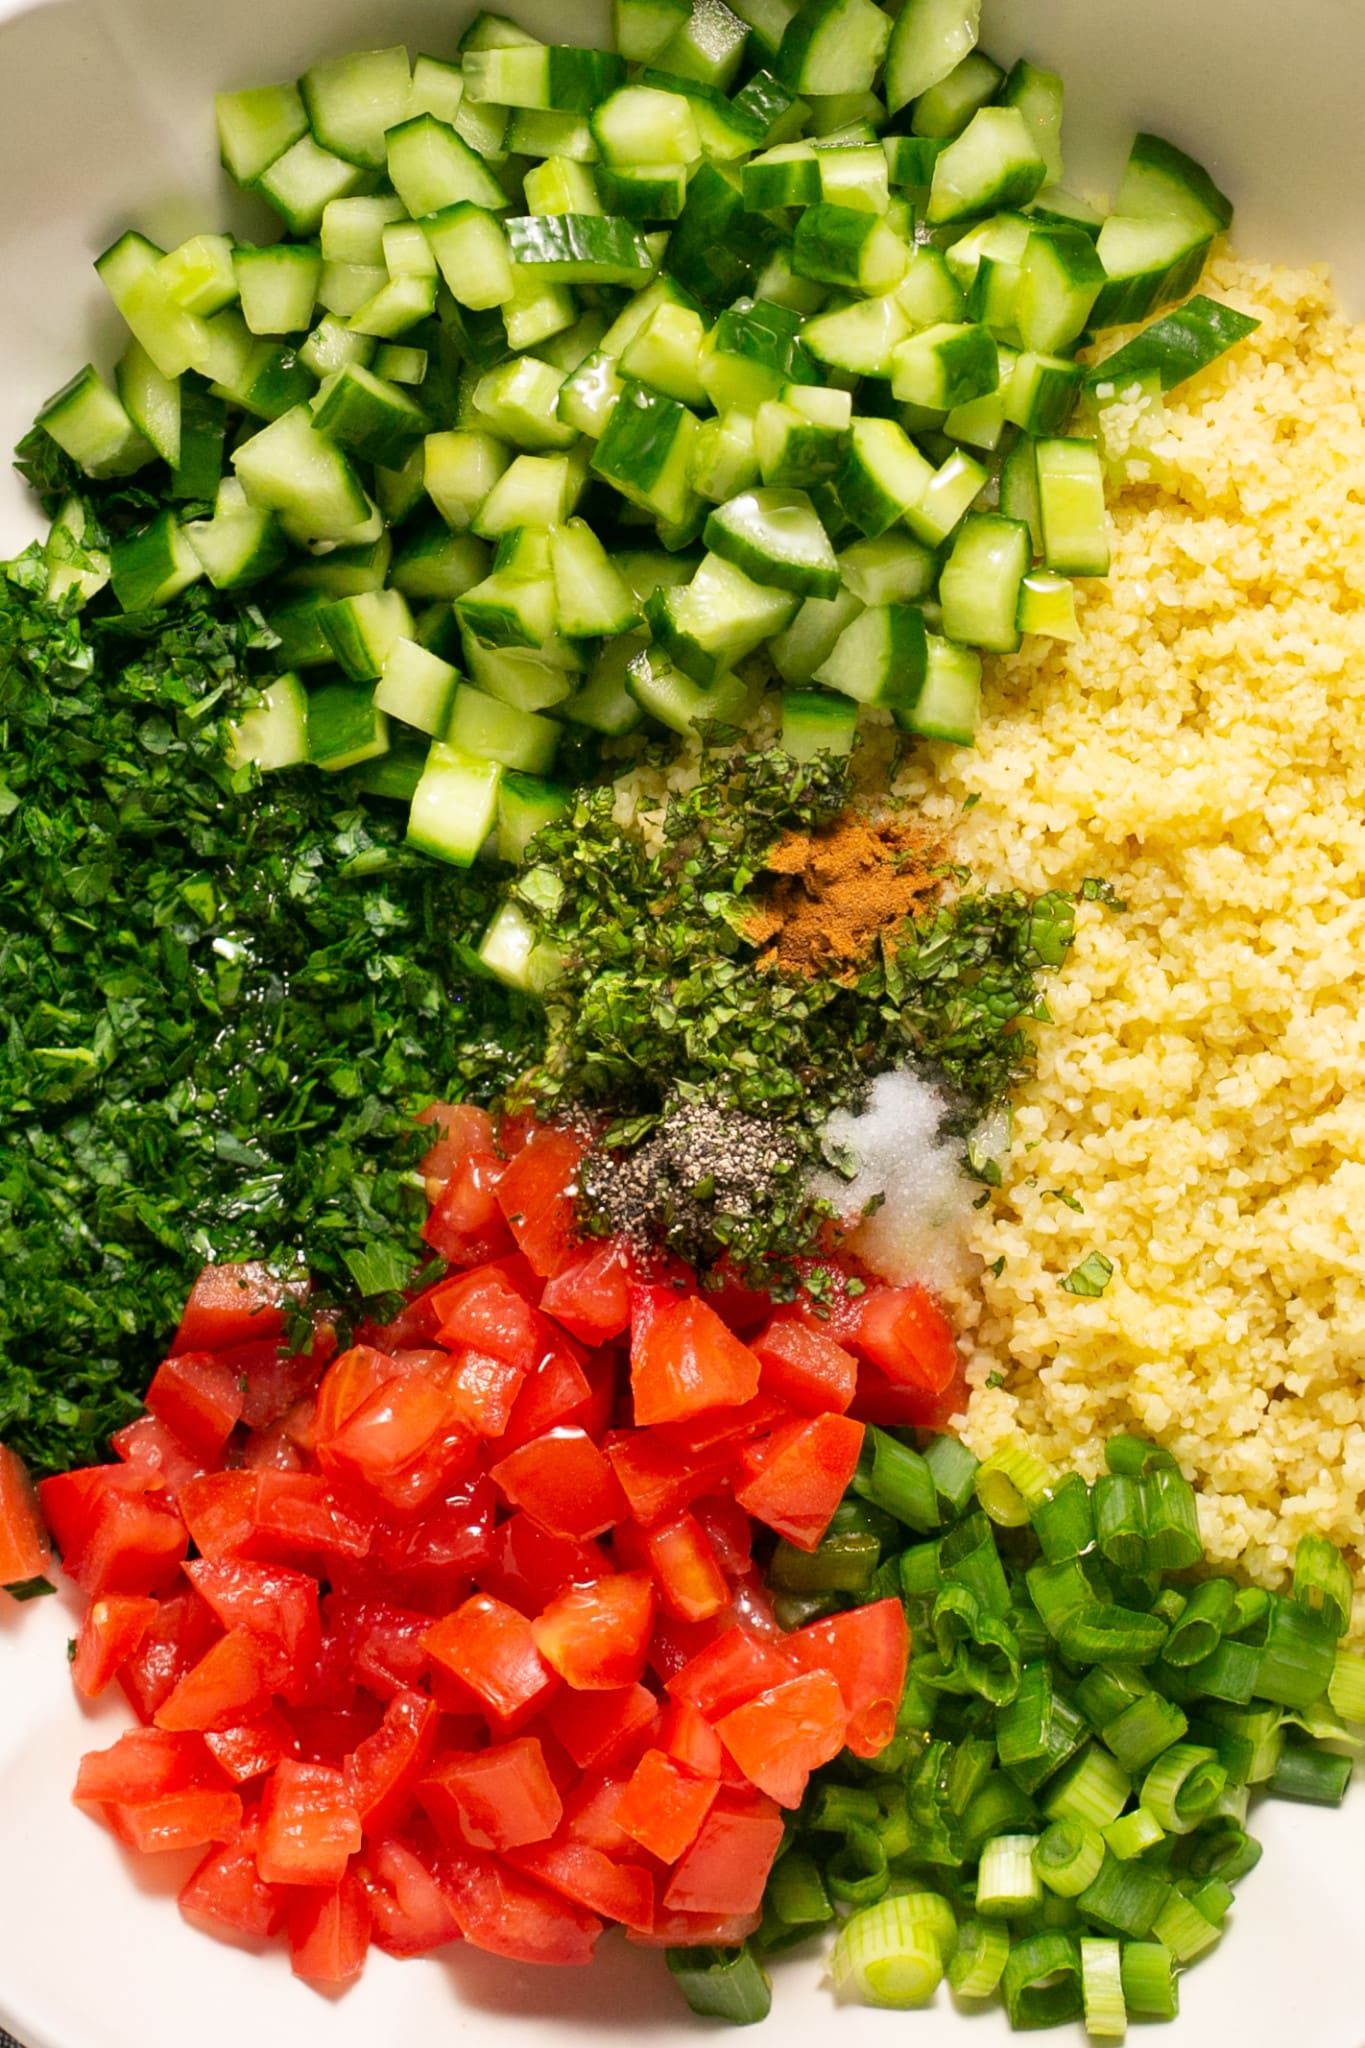 fresh ingredients for bulgur salad in a mixing bowl.